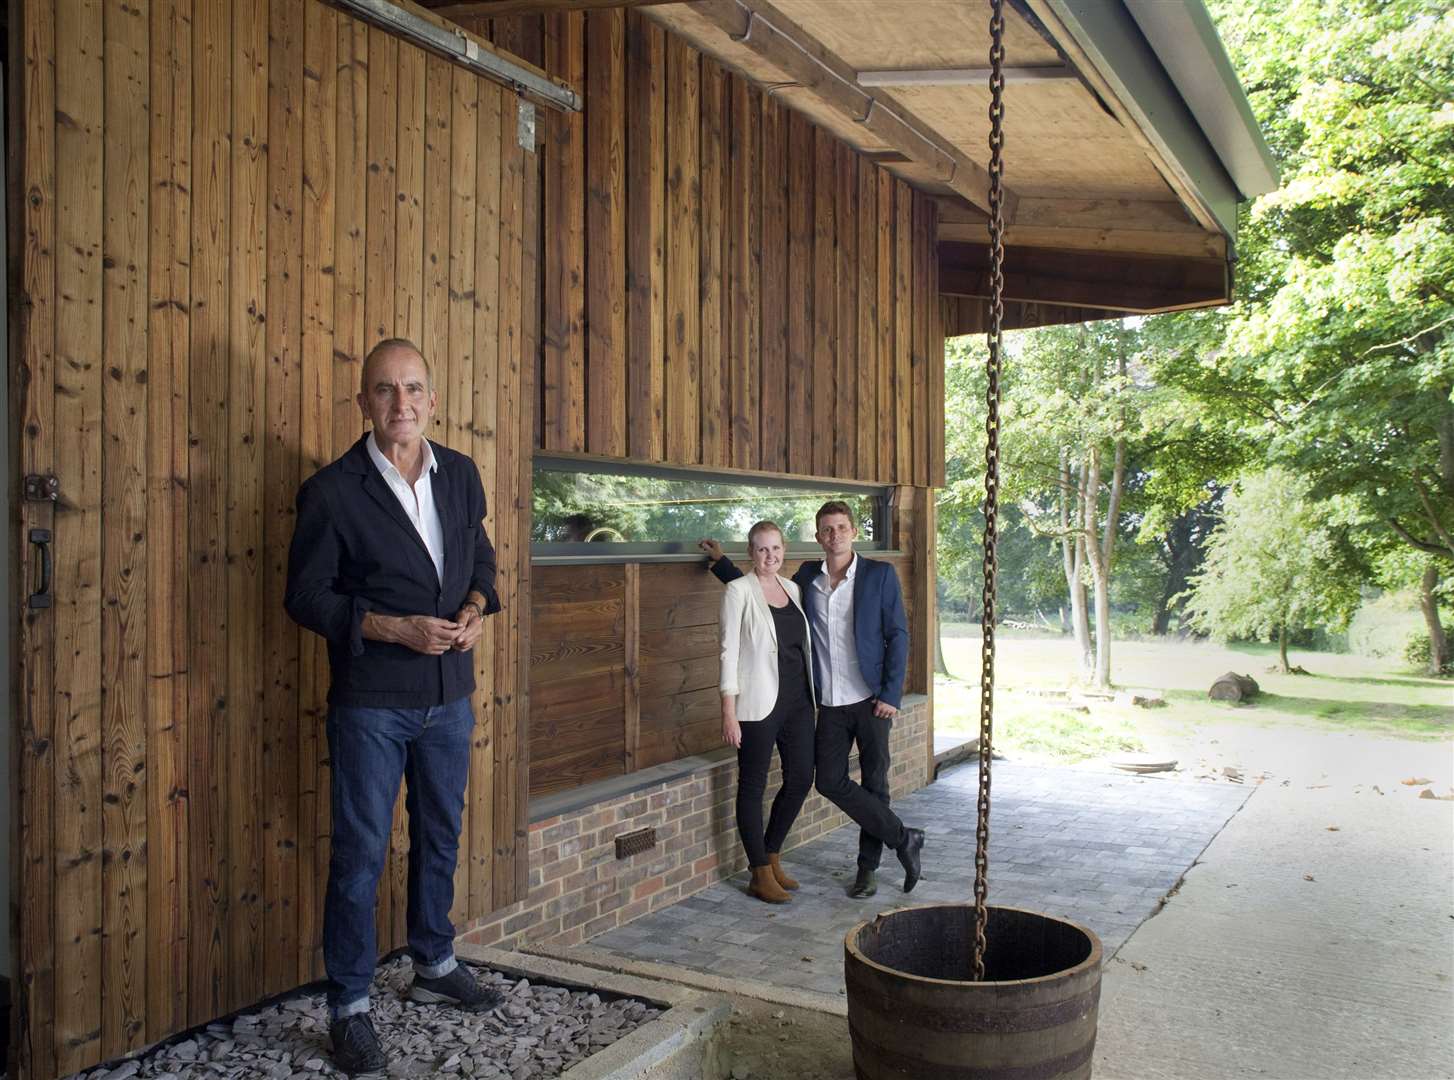 Sevenoaks couple Greg and Georgie built their dream home on a £250,000 budget. Picture: Channel 4